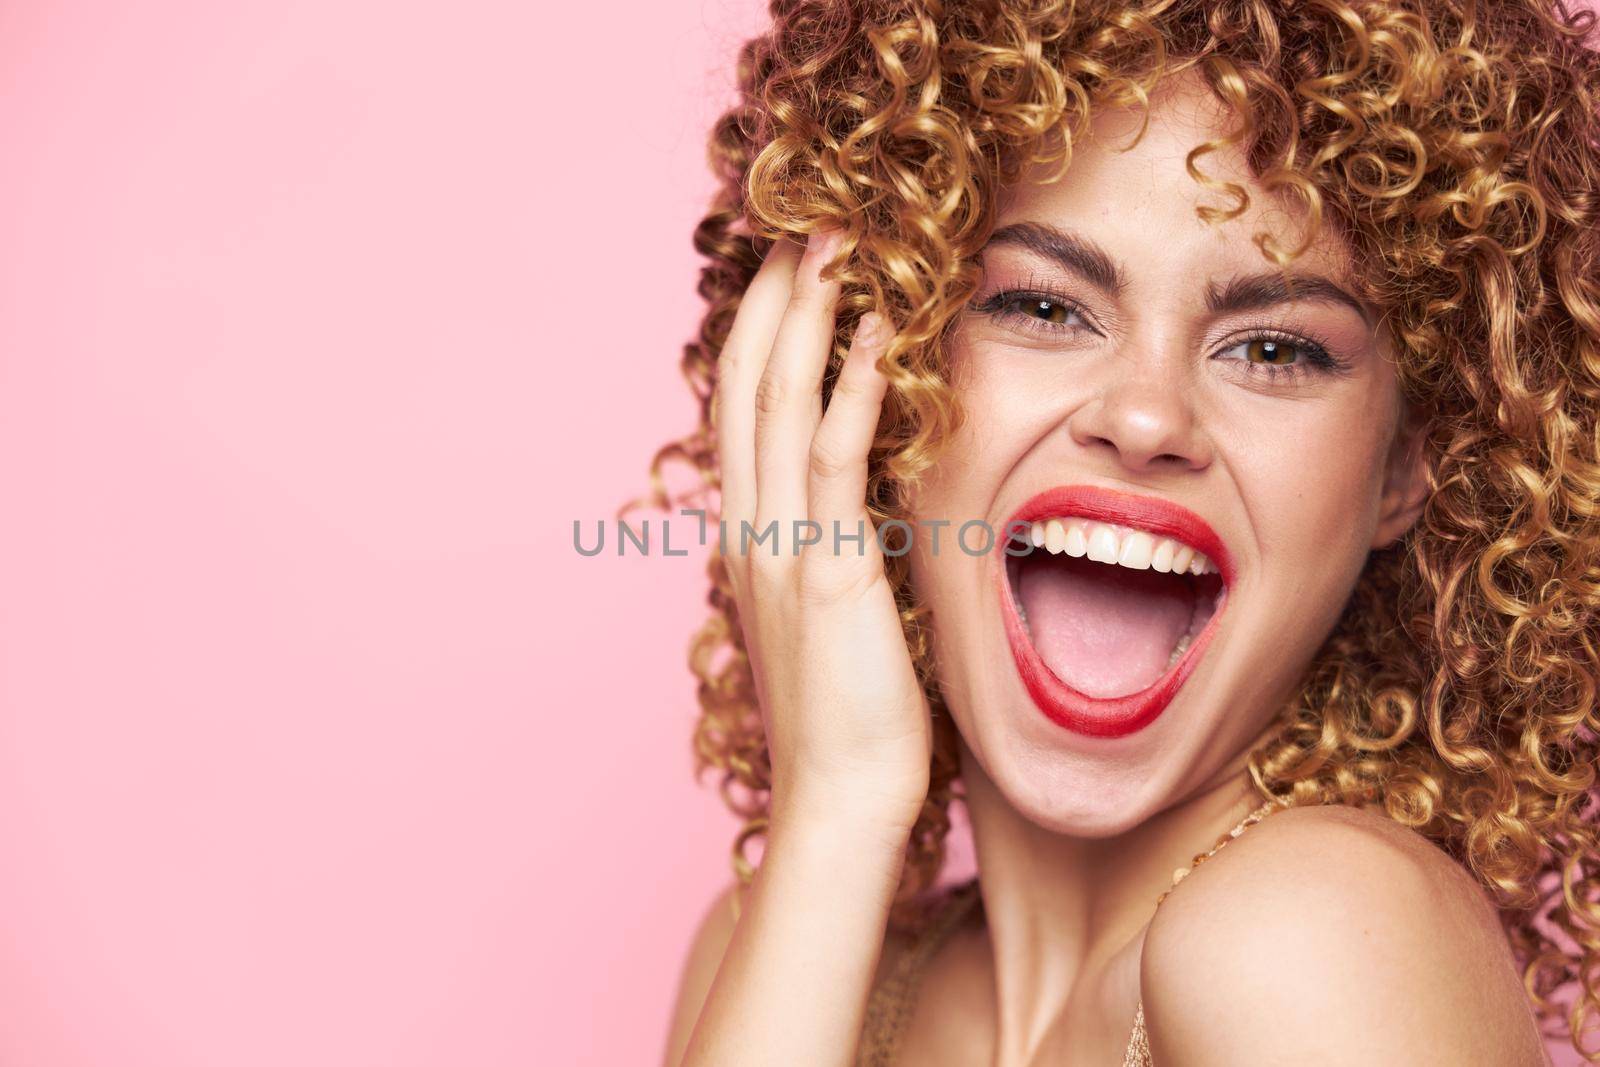 Charming model Energetic appearance wide open mouth emotions curly hair pink isolated background